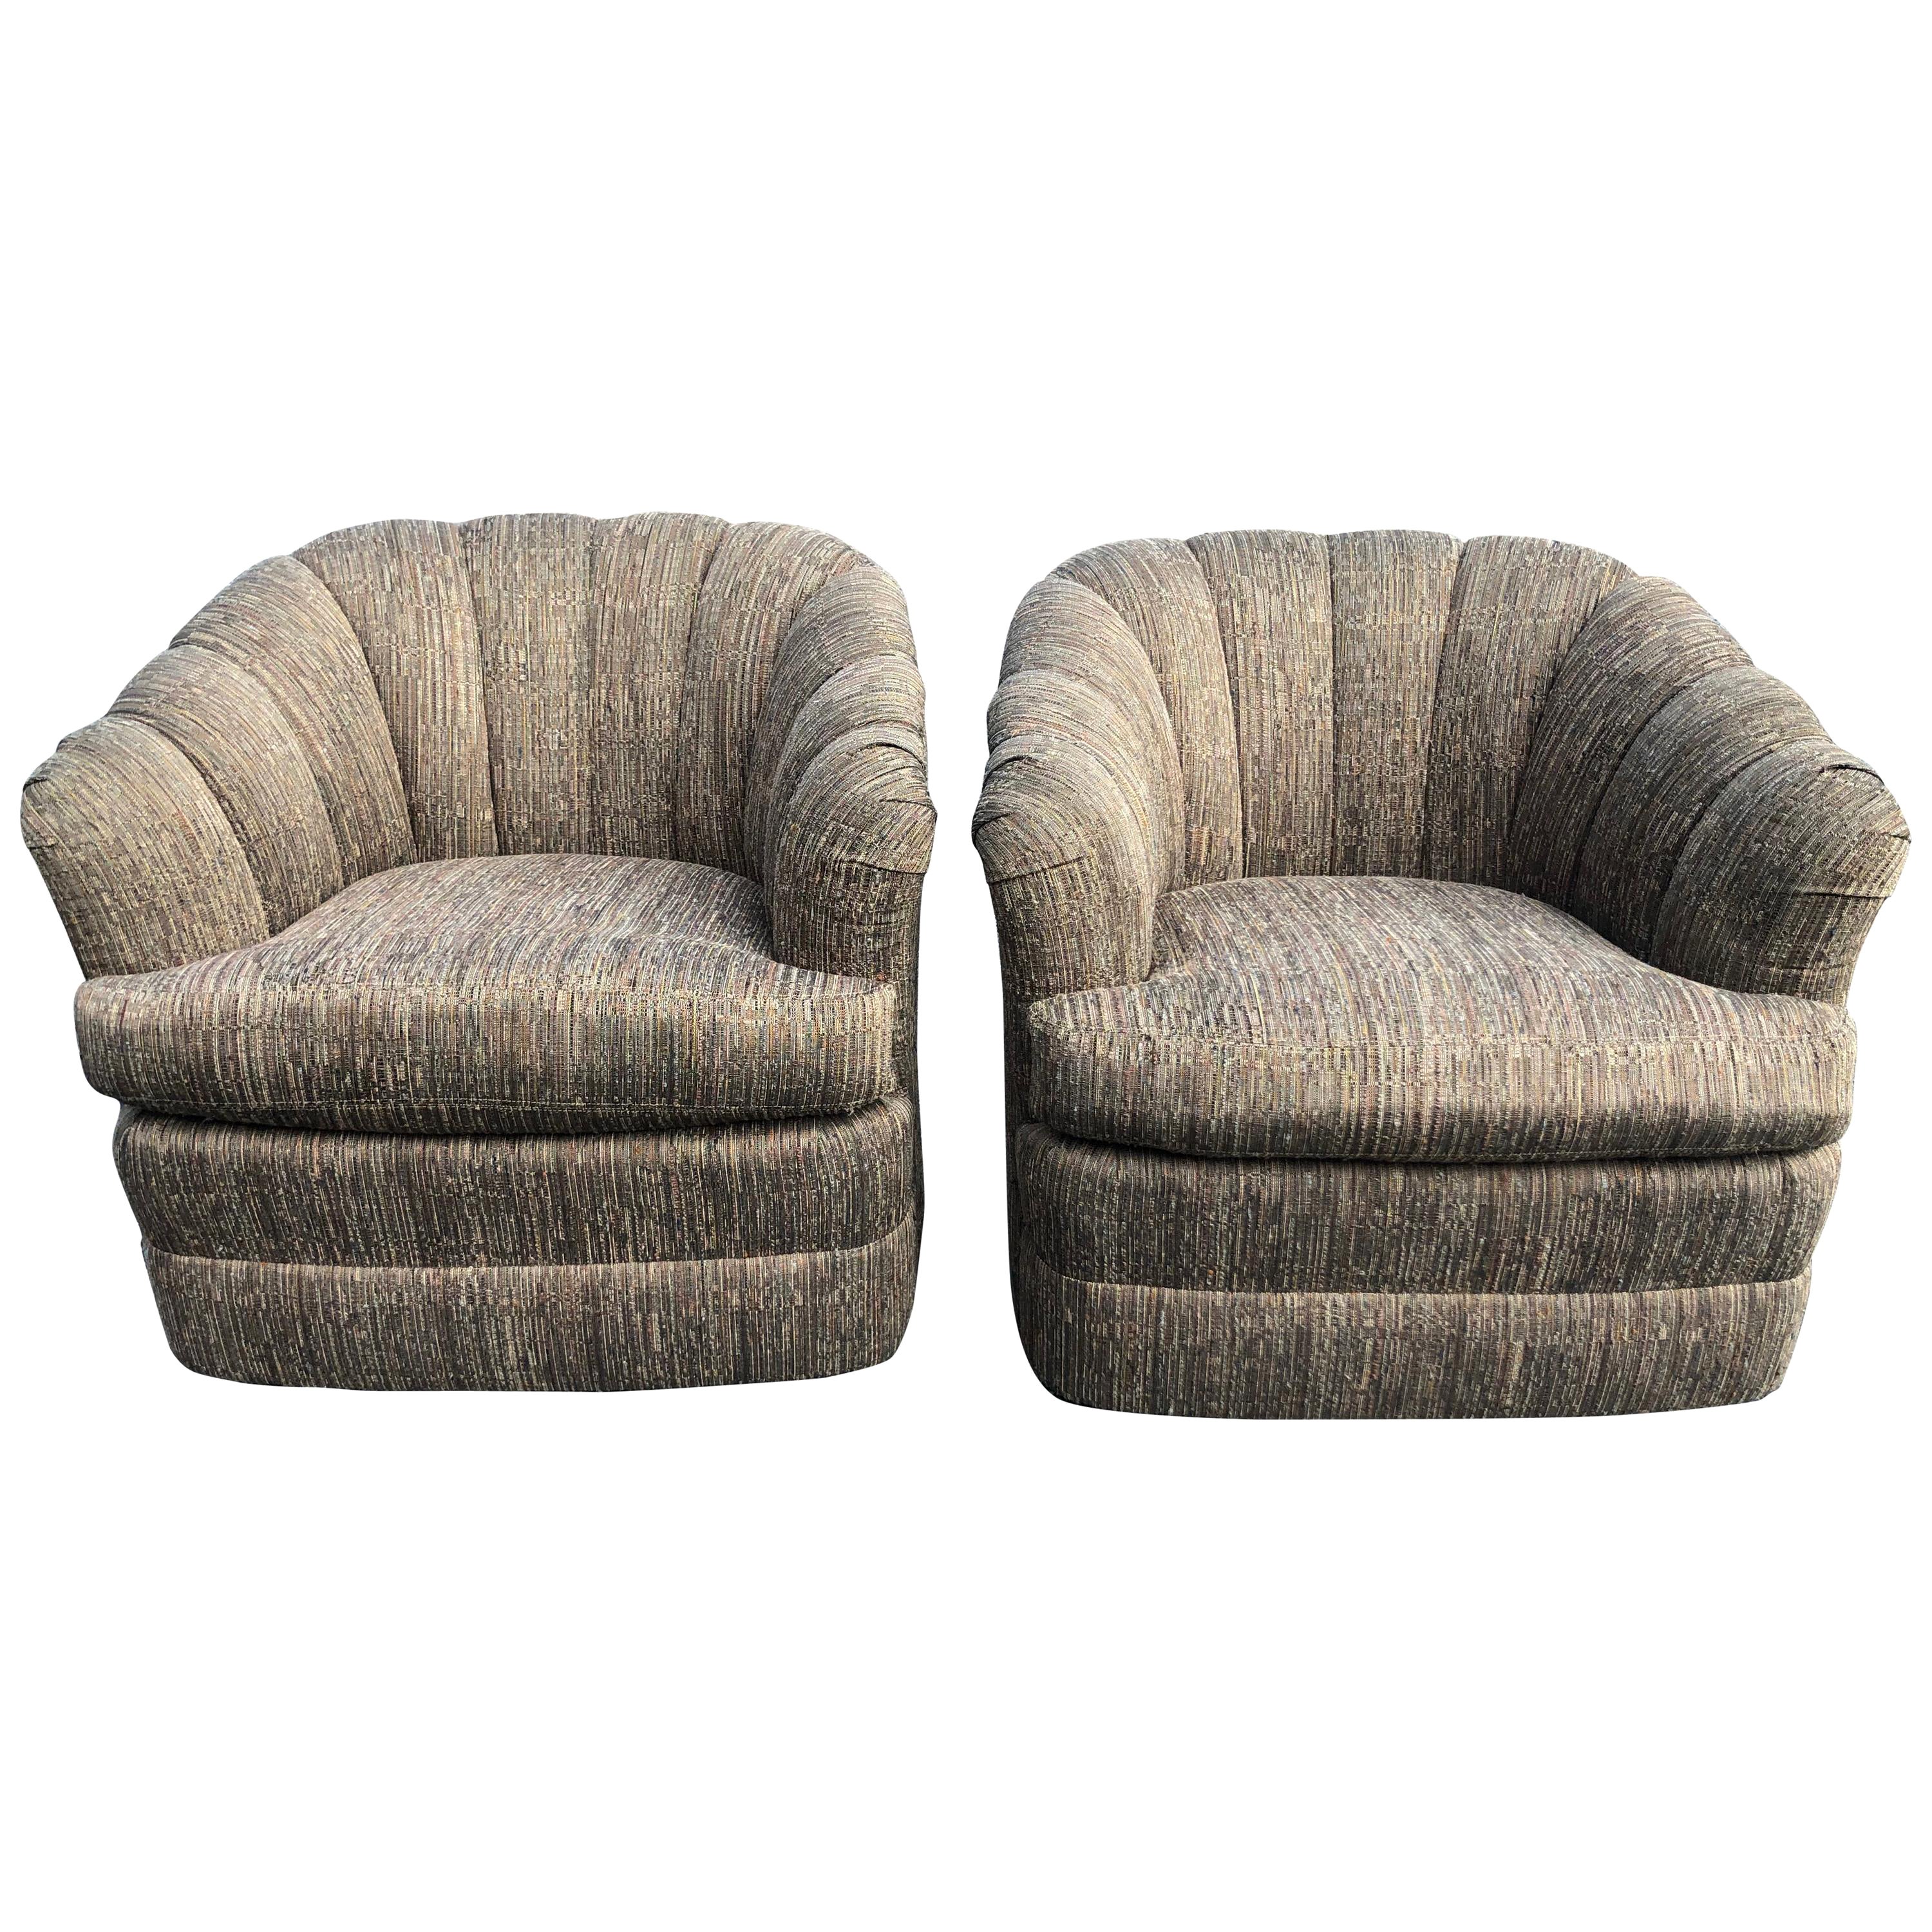 Pair of Textured Silver Gray Swivel Chairs